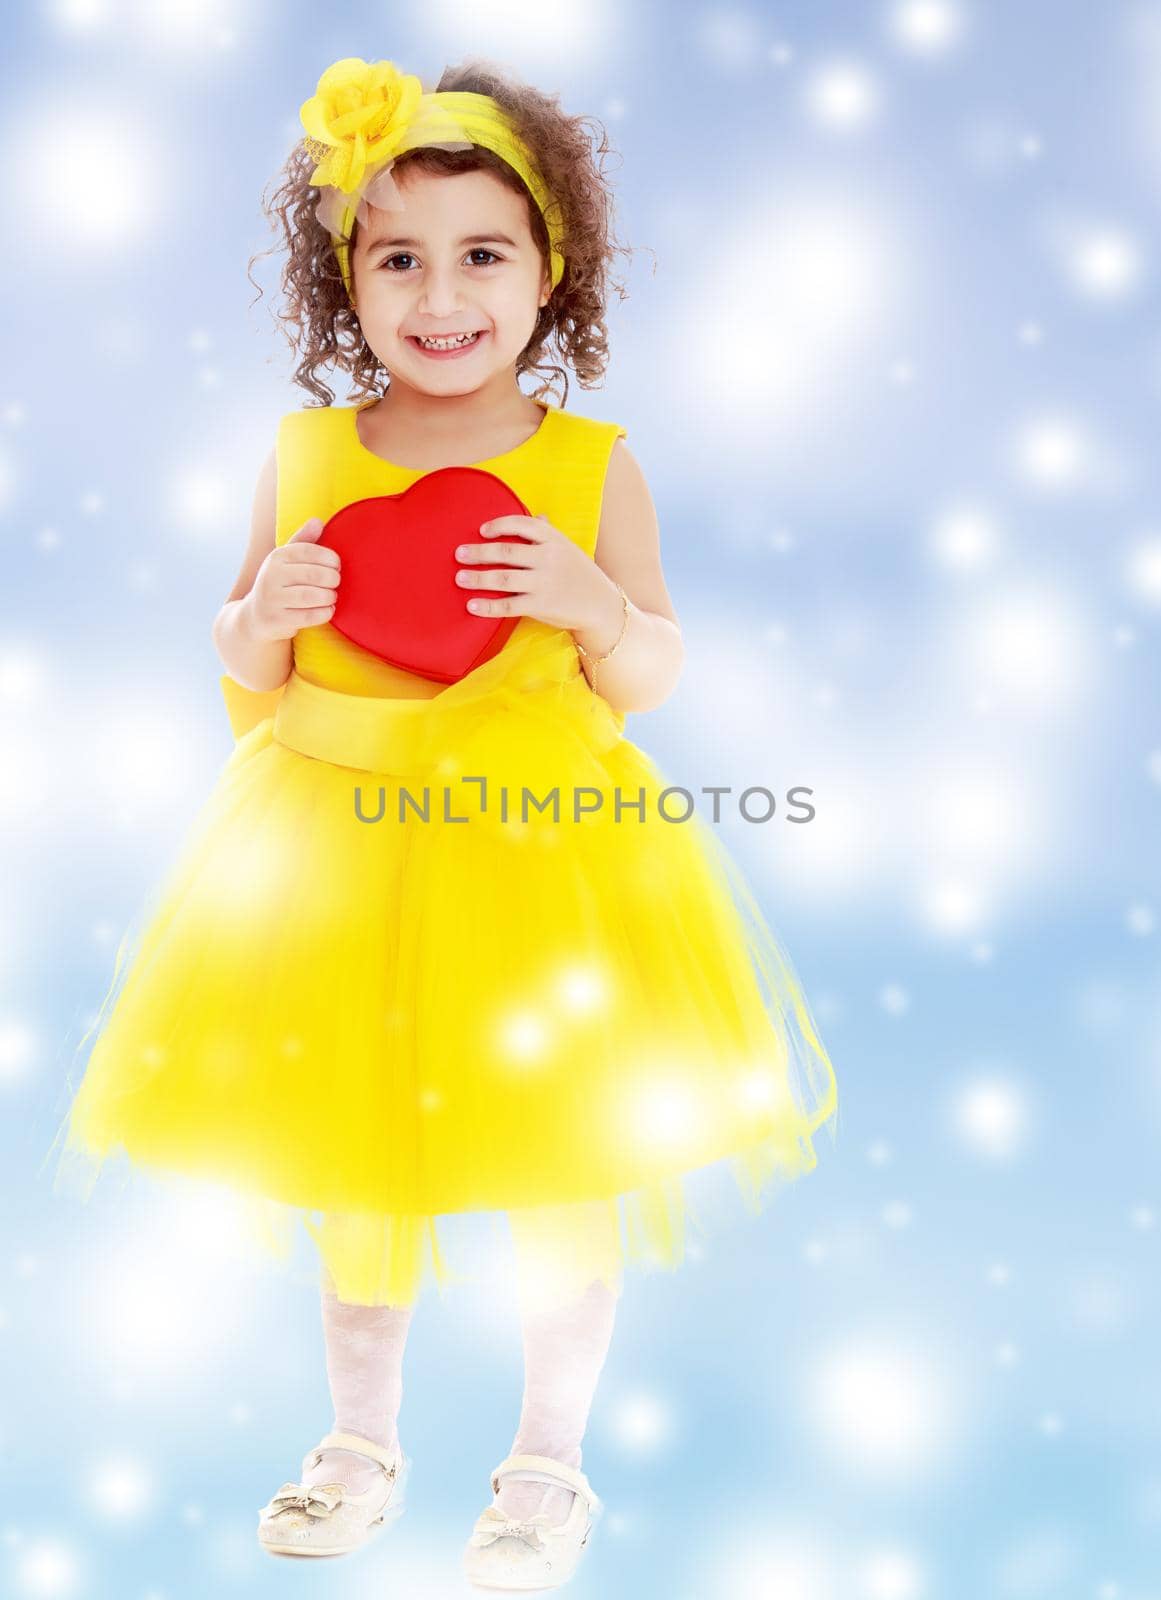 Adorable little girl in bright yellow elegant dress. Close to her heart.Blue winter background with white snowflakes.